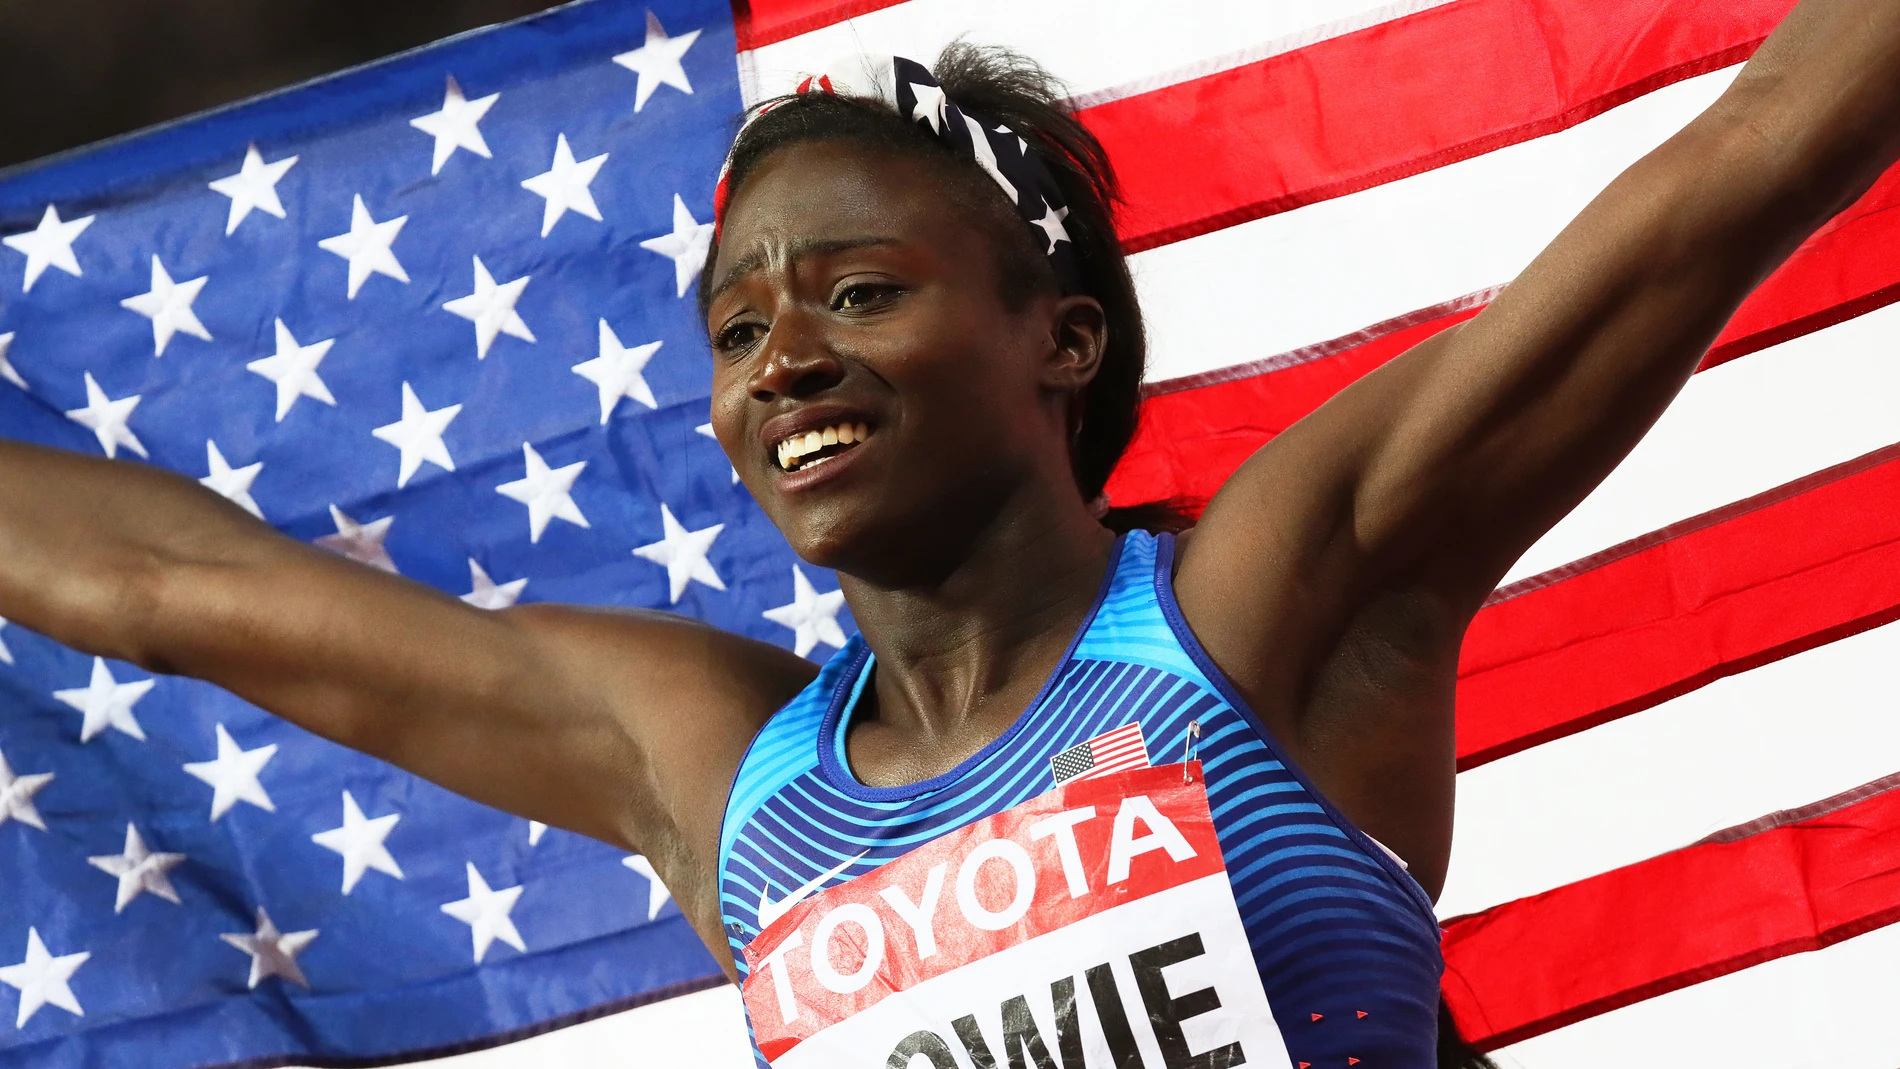 London (United Kingdom), 06/08/2017.- (FILE) - Gold medalist Tori Bowie of the USA celebrates winning the women's 100m at the London 2017 IAAF World Championships in London, Britain, 06 August 2017 (reissued 03 May 2023). Olympic gold medalist Tori Bowie died at the age of 32, her agent said on 03 May 2023. (Mundial de Atletismo, 100 metros, Reino Unido, Estados Unidos, Londres) EFE/EPA/SRDJAN SUKI *** Local Caption *** 53691860 